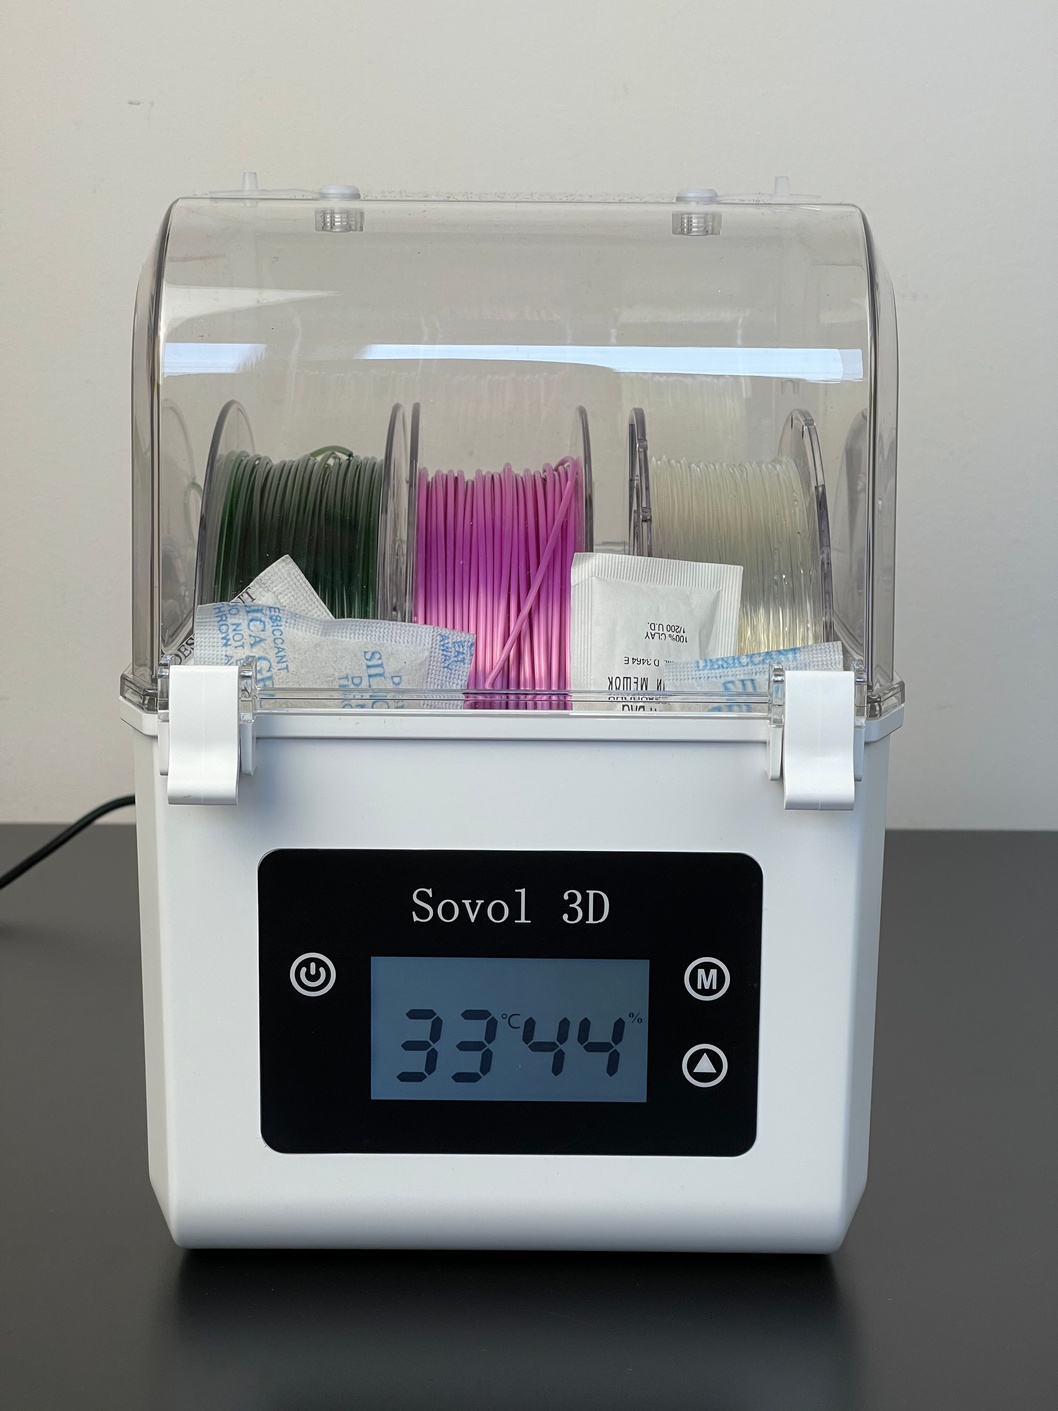 Sovol Filament Drier performance with dessicant 2 6 hours | Sovol Filament Dryer Review: Does it really work?